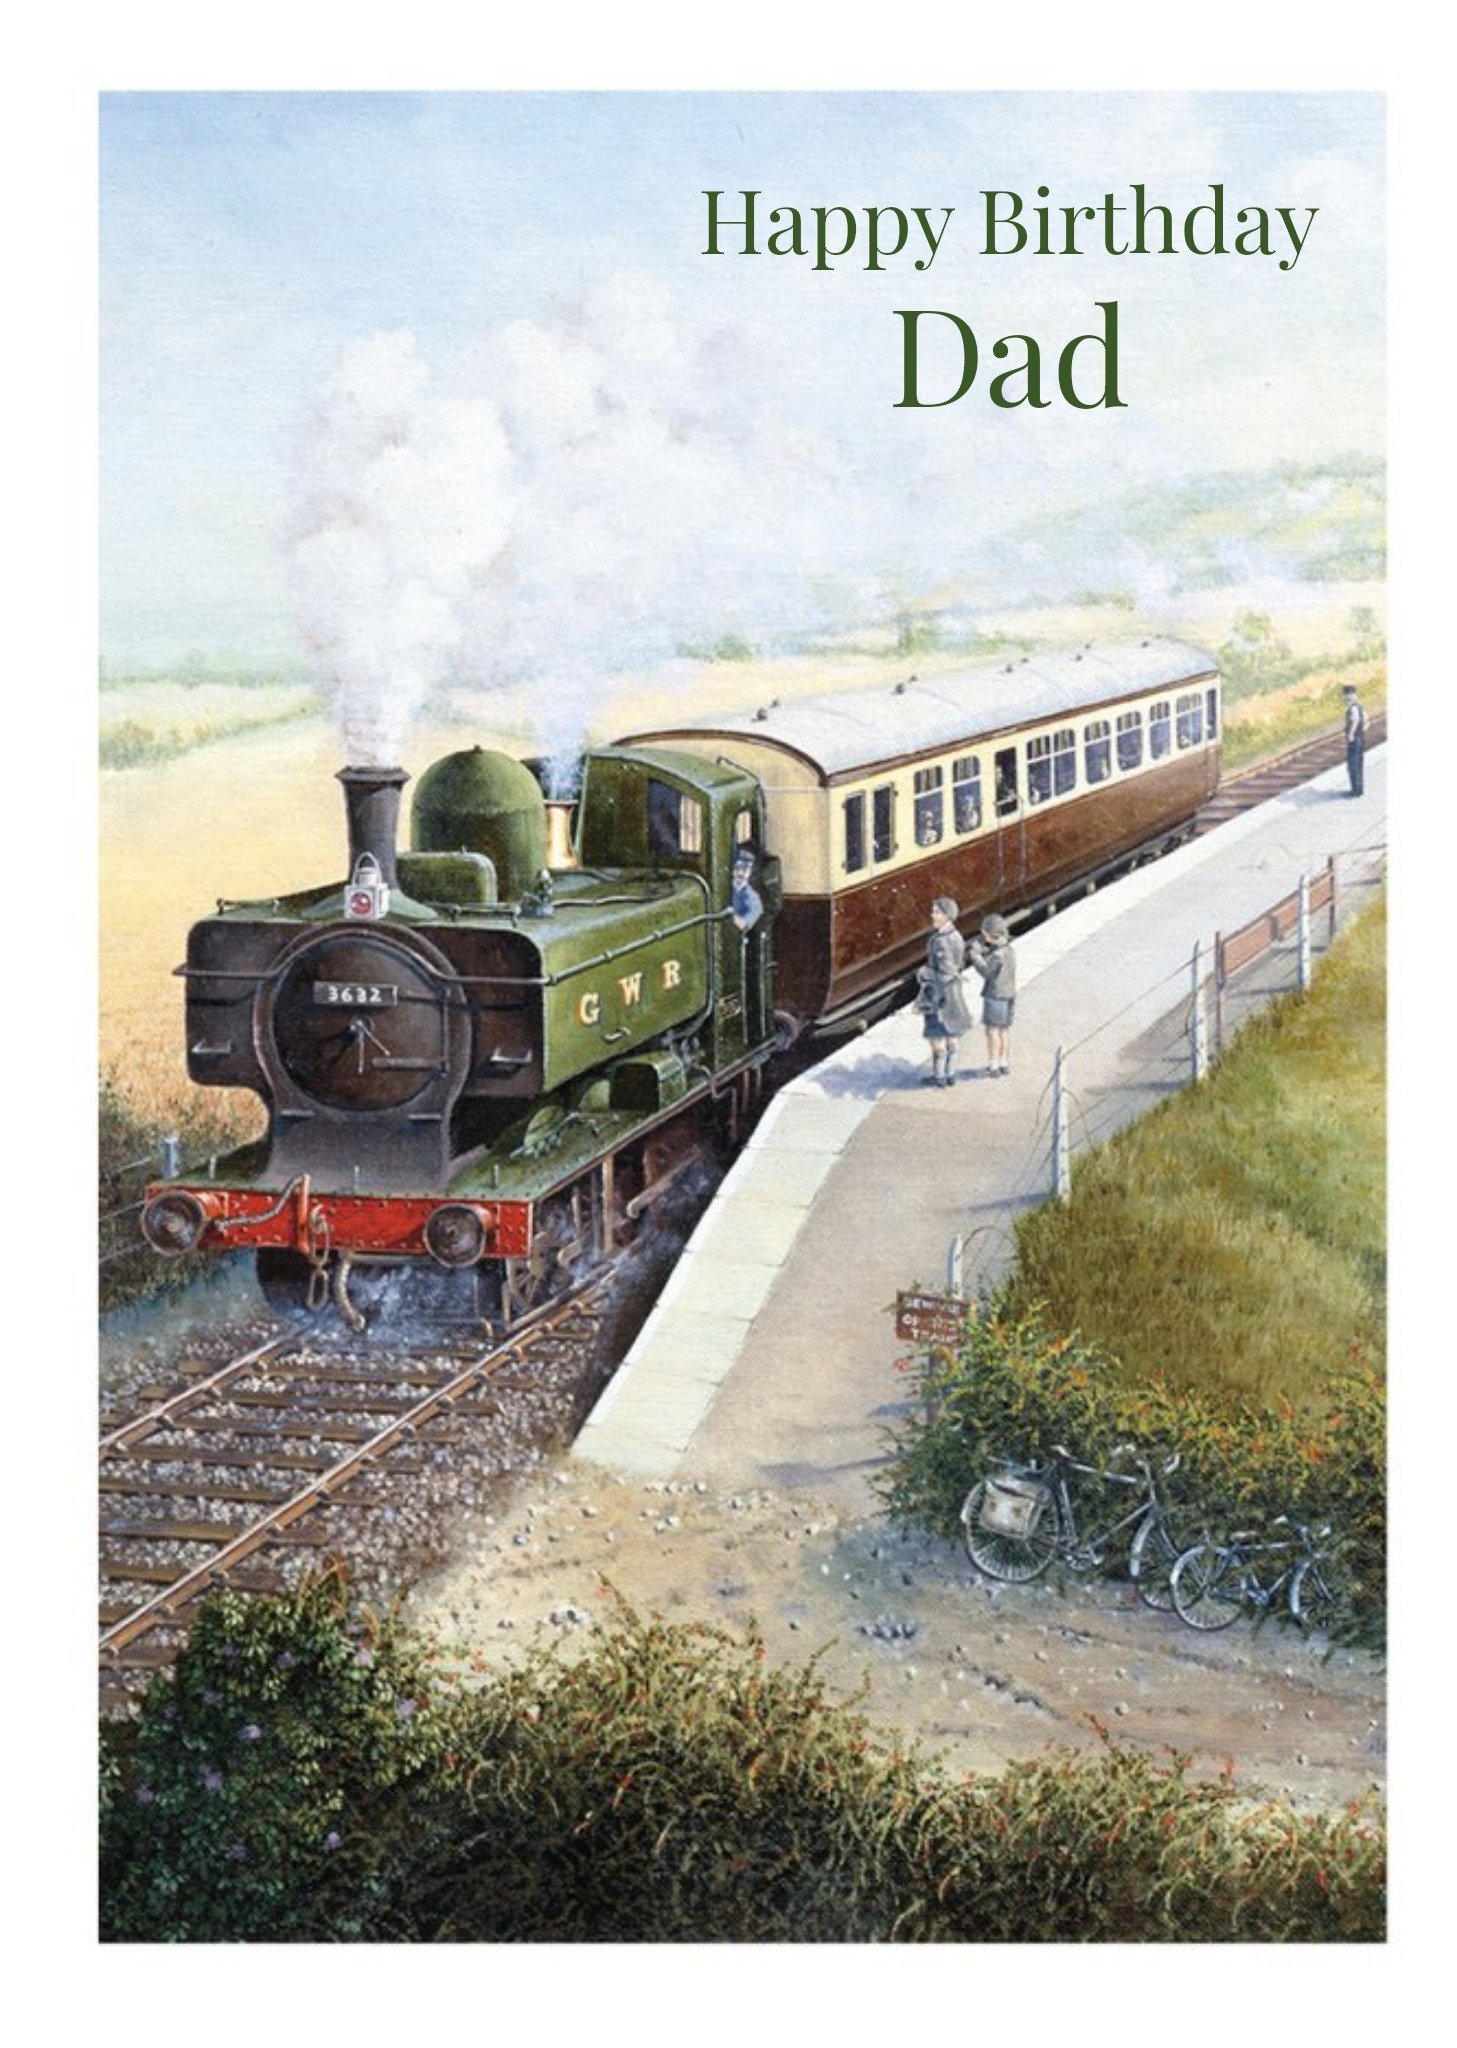 Moonpig Traditional Steam Train Painting For Dad On His Birthday Card, Large